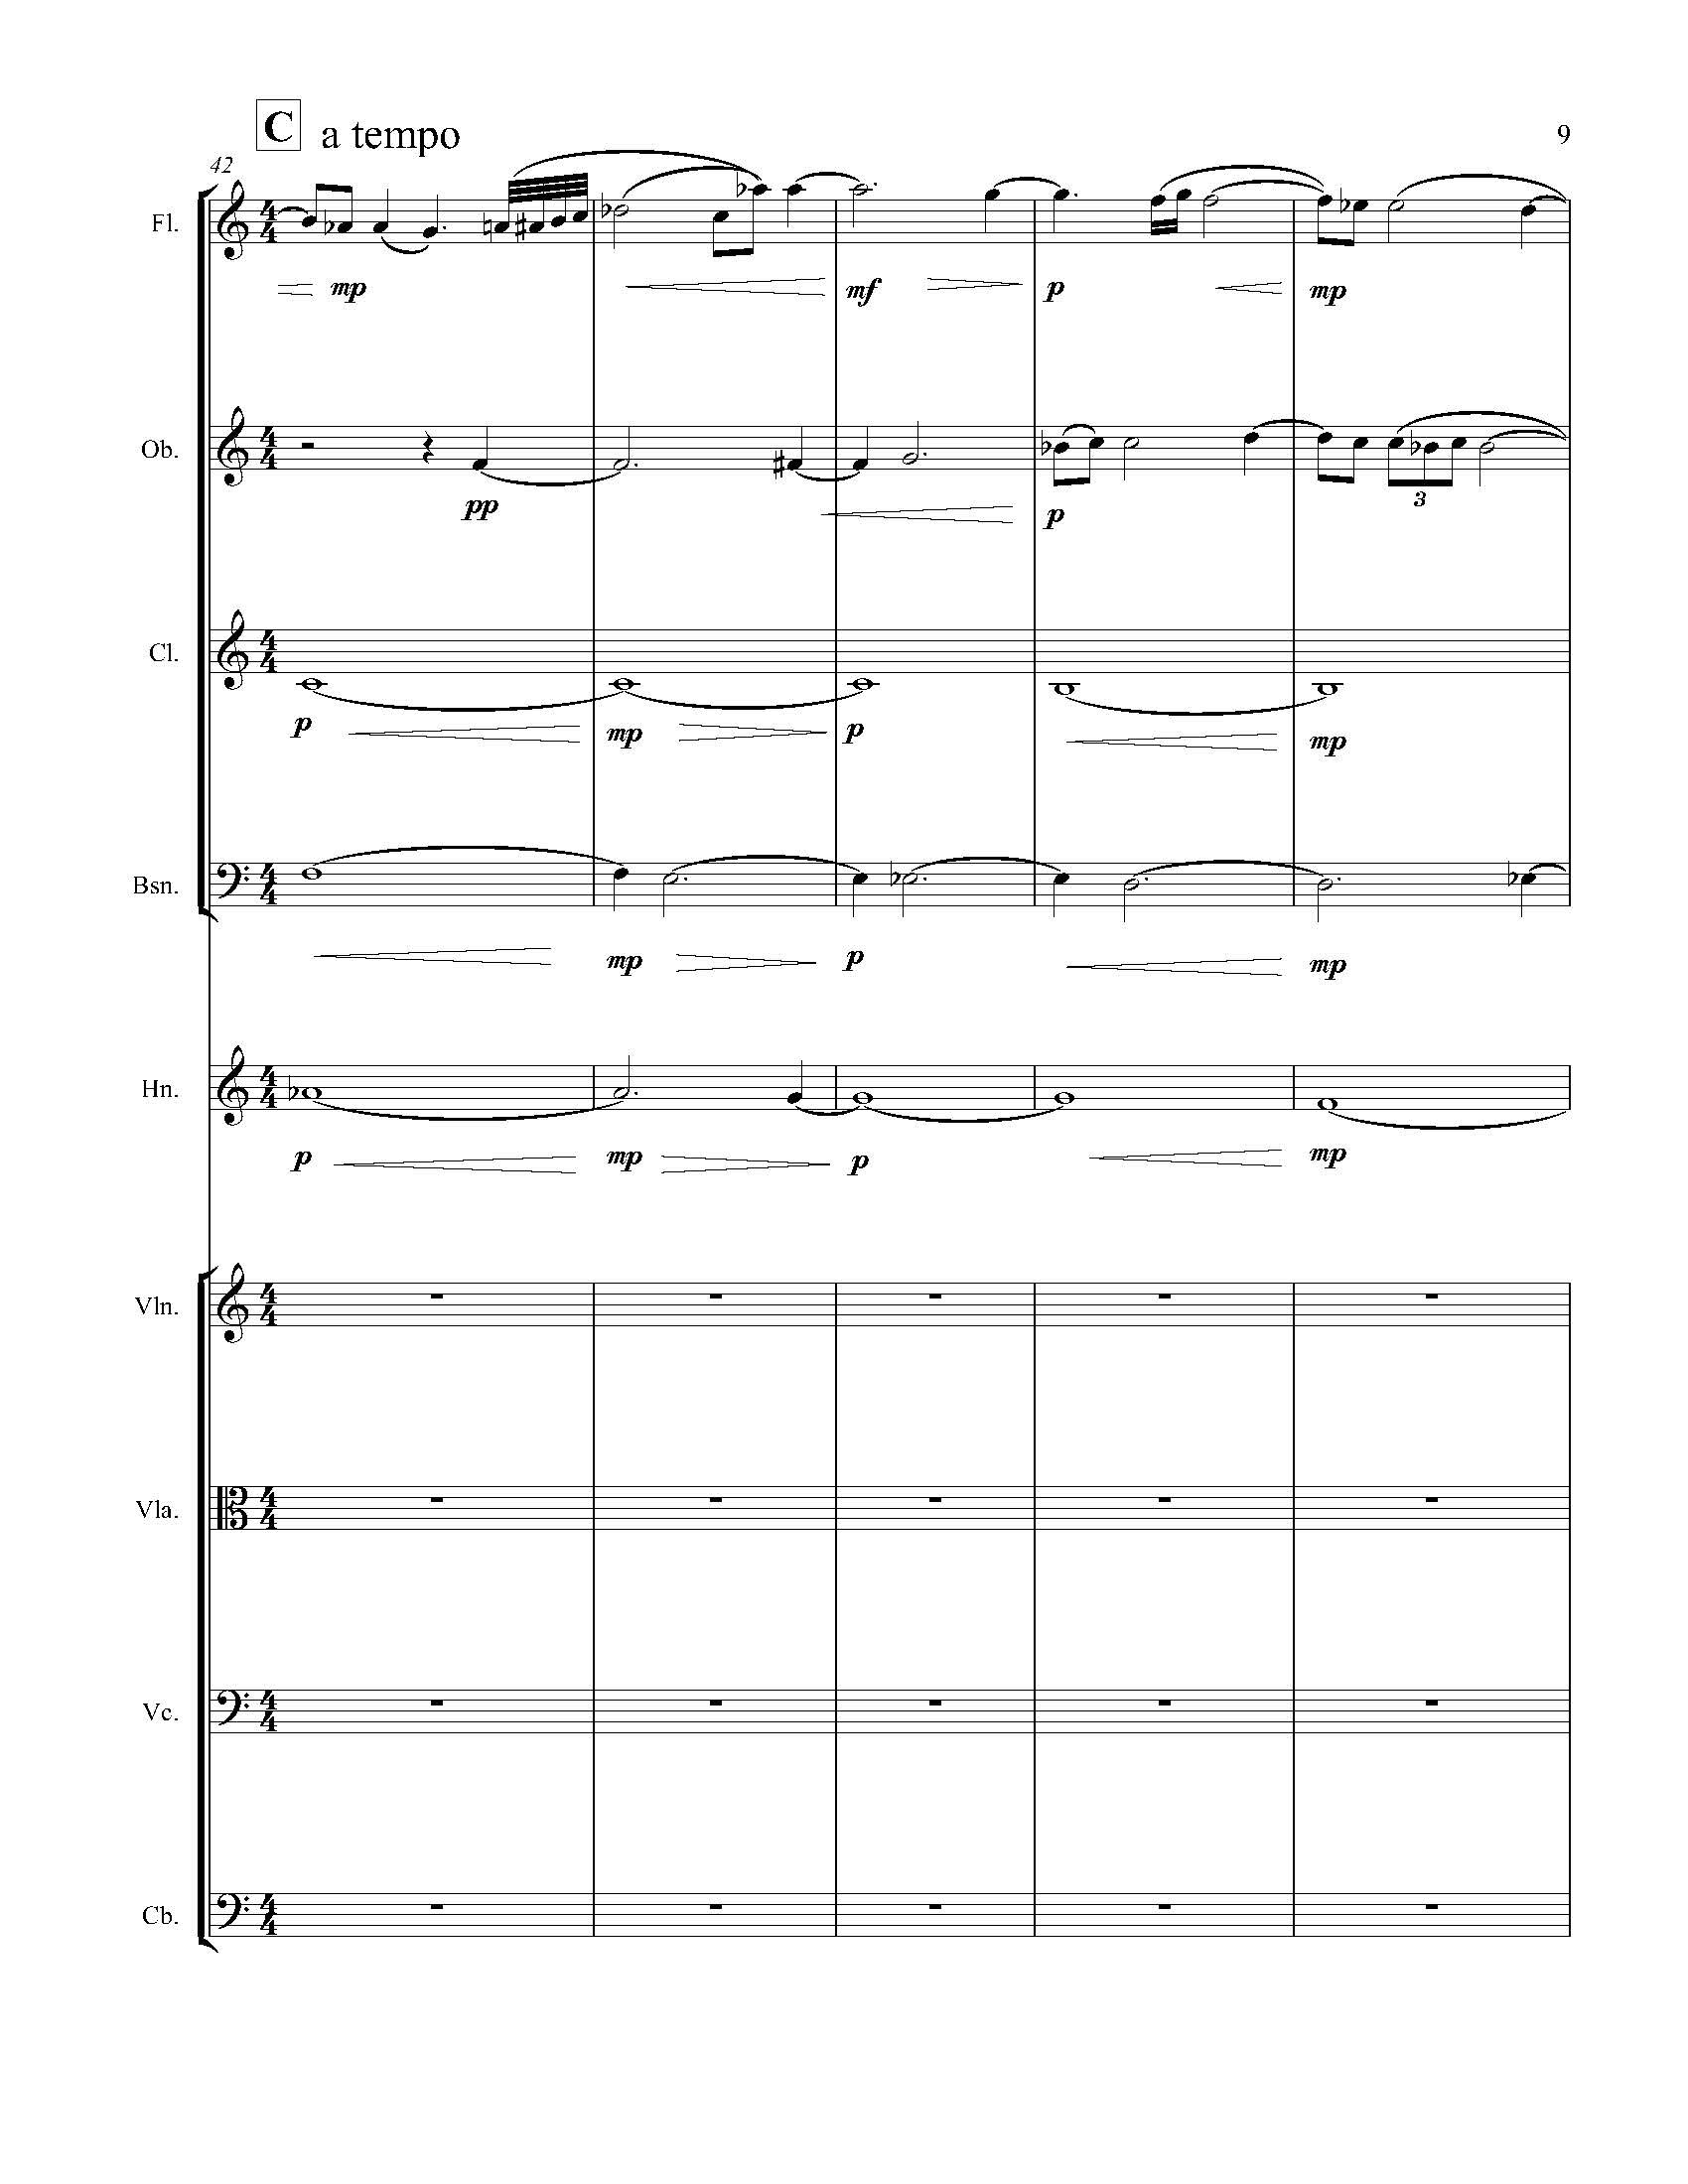 In Search of a Bird - Complete Score_Page_15.jpg